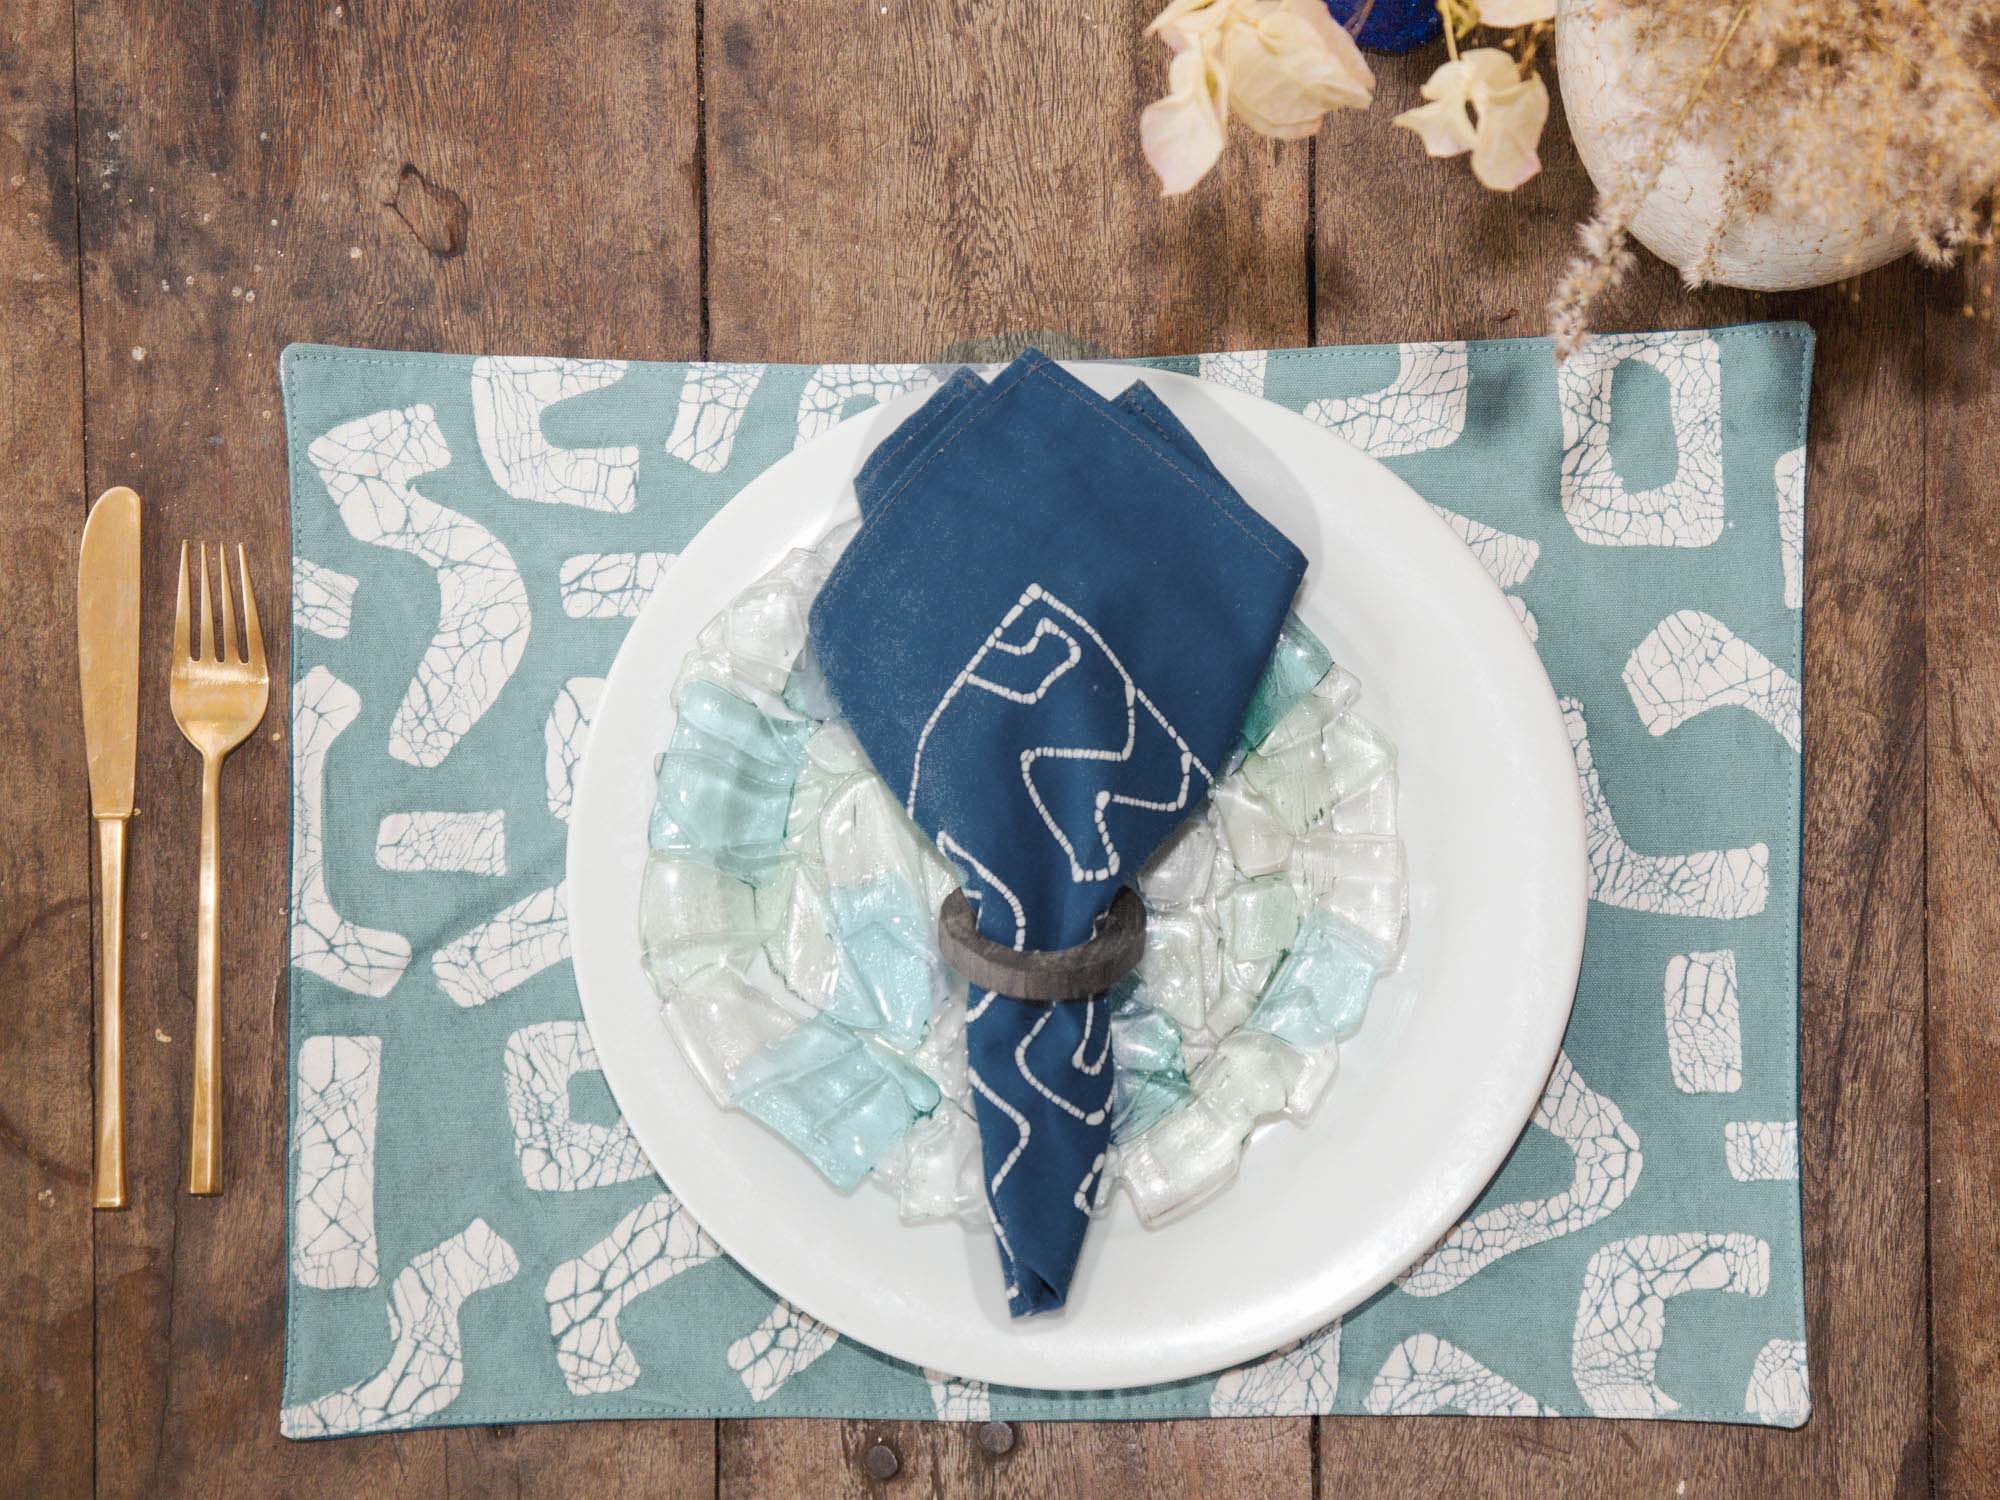 African made indigo napkins, that don't compromise on style or sustainability.